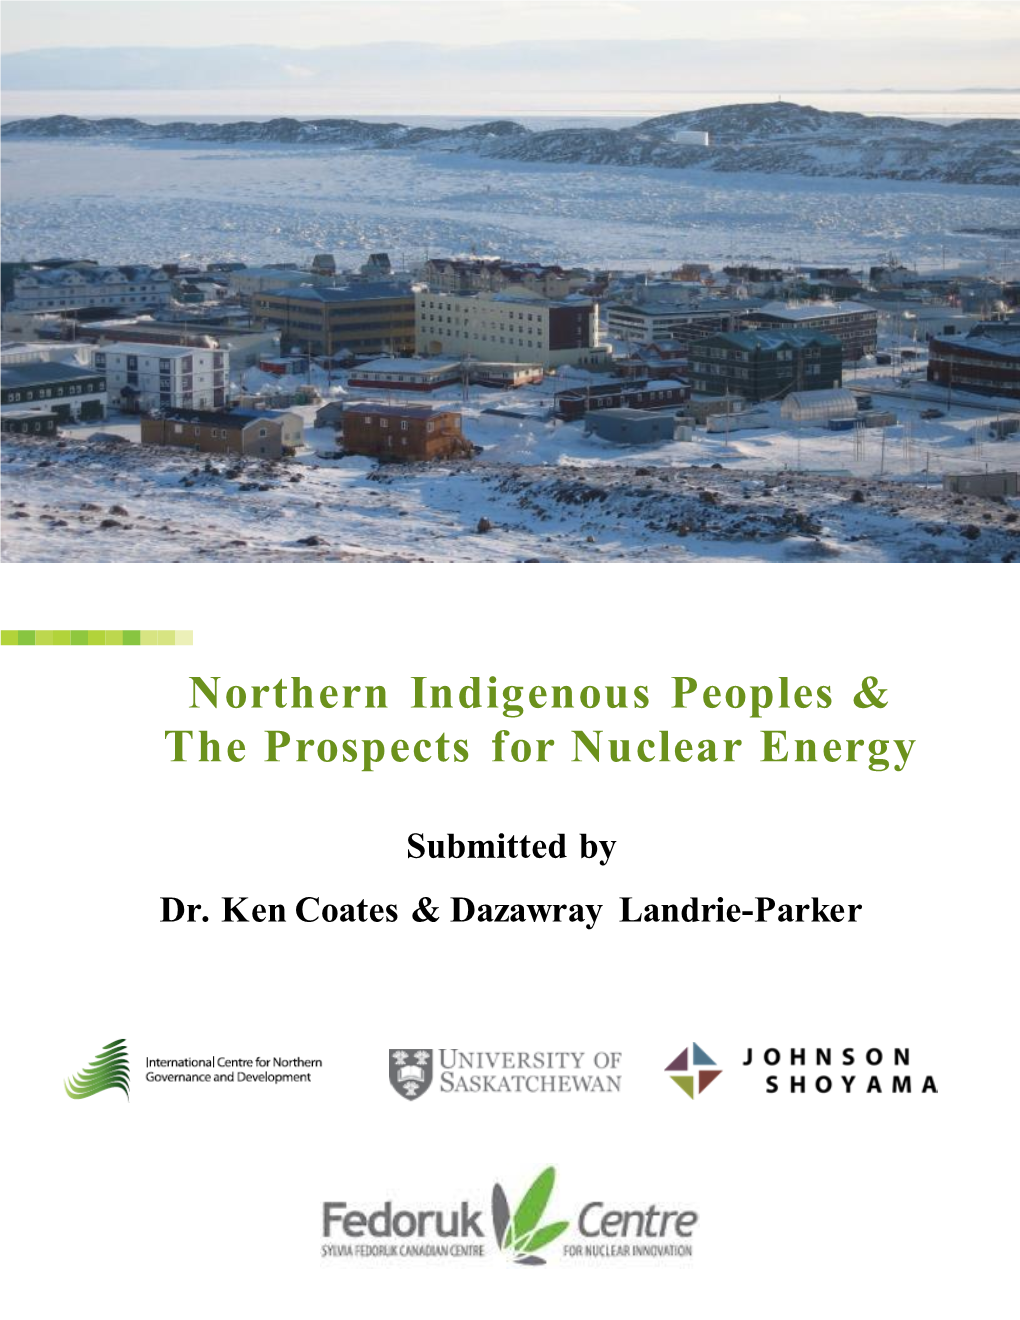 Northern Indigenous Peoples & the Prospects for Nuclear Energy